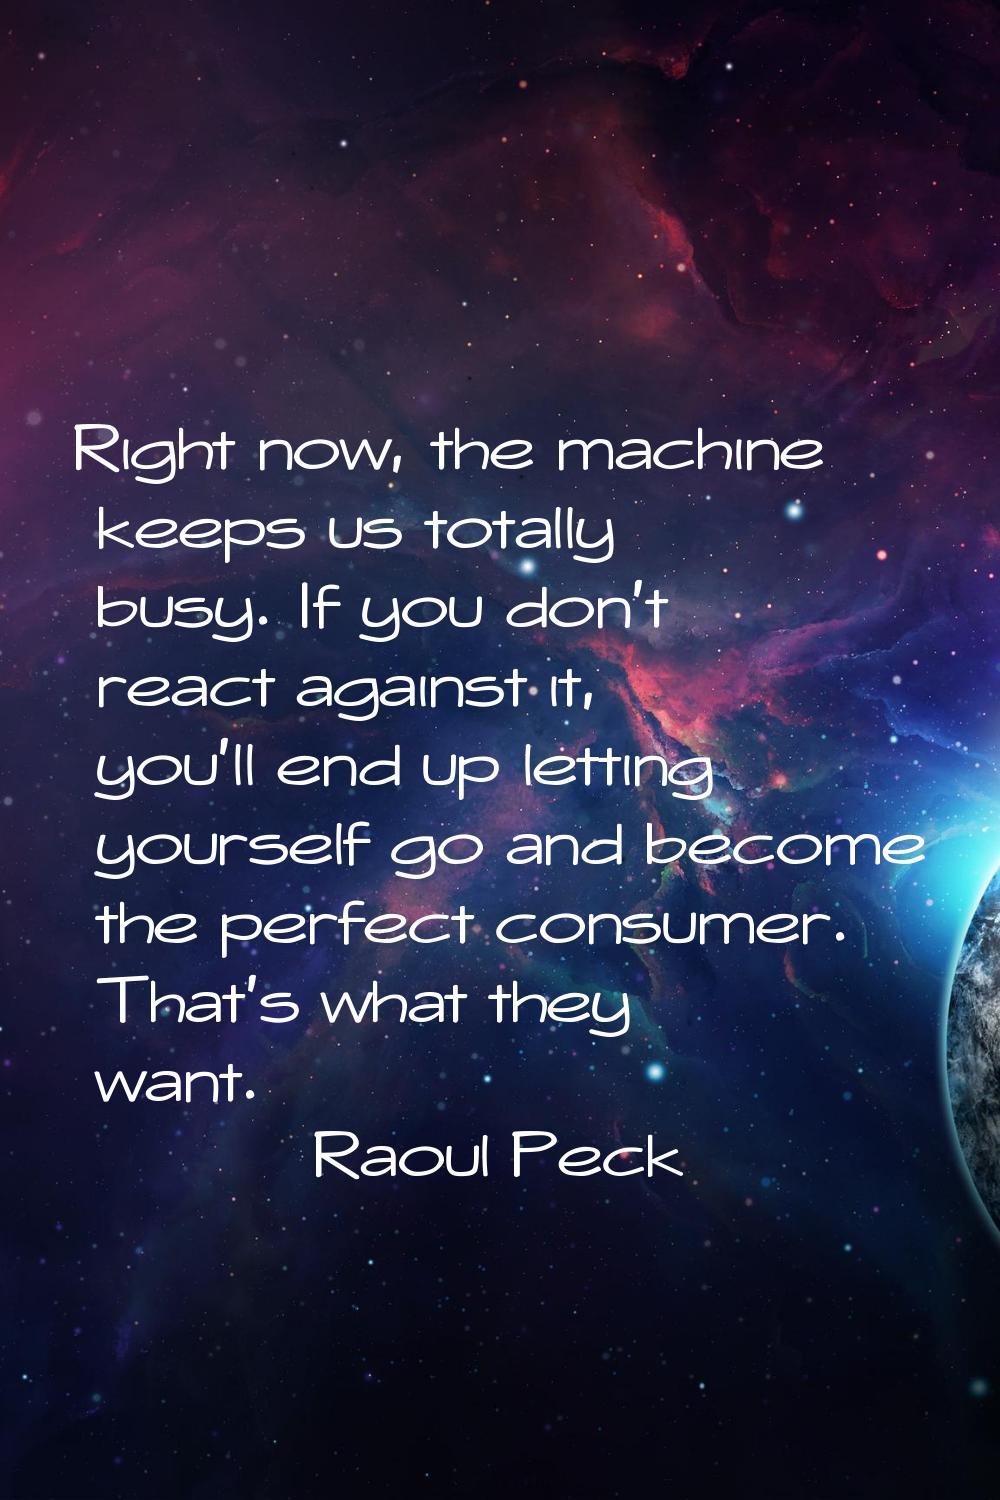 Right now, the machine keeps us totally busy. If you don't react against it, you'll end up letting 